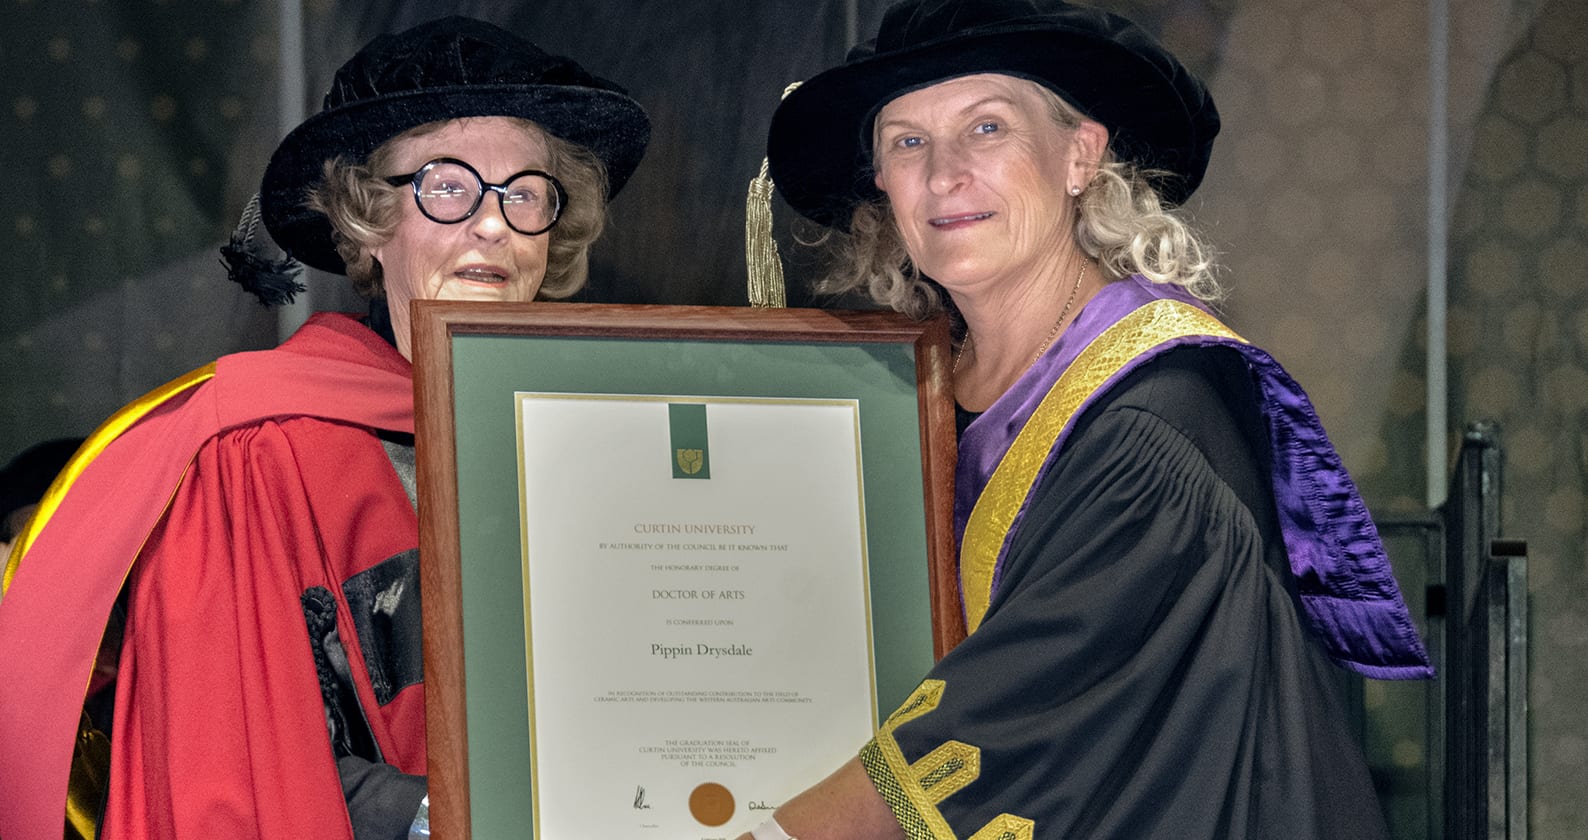 Image for Leading Australian ceramic artist awarded Curtin Honorary Doctorate